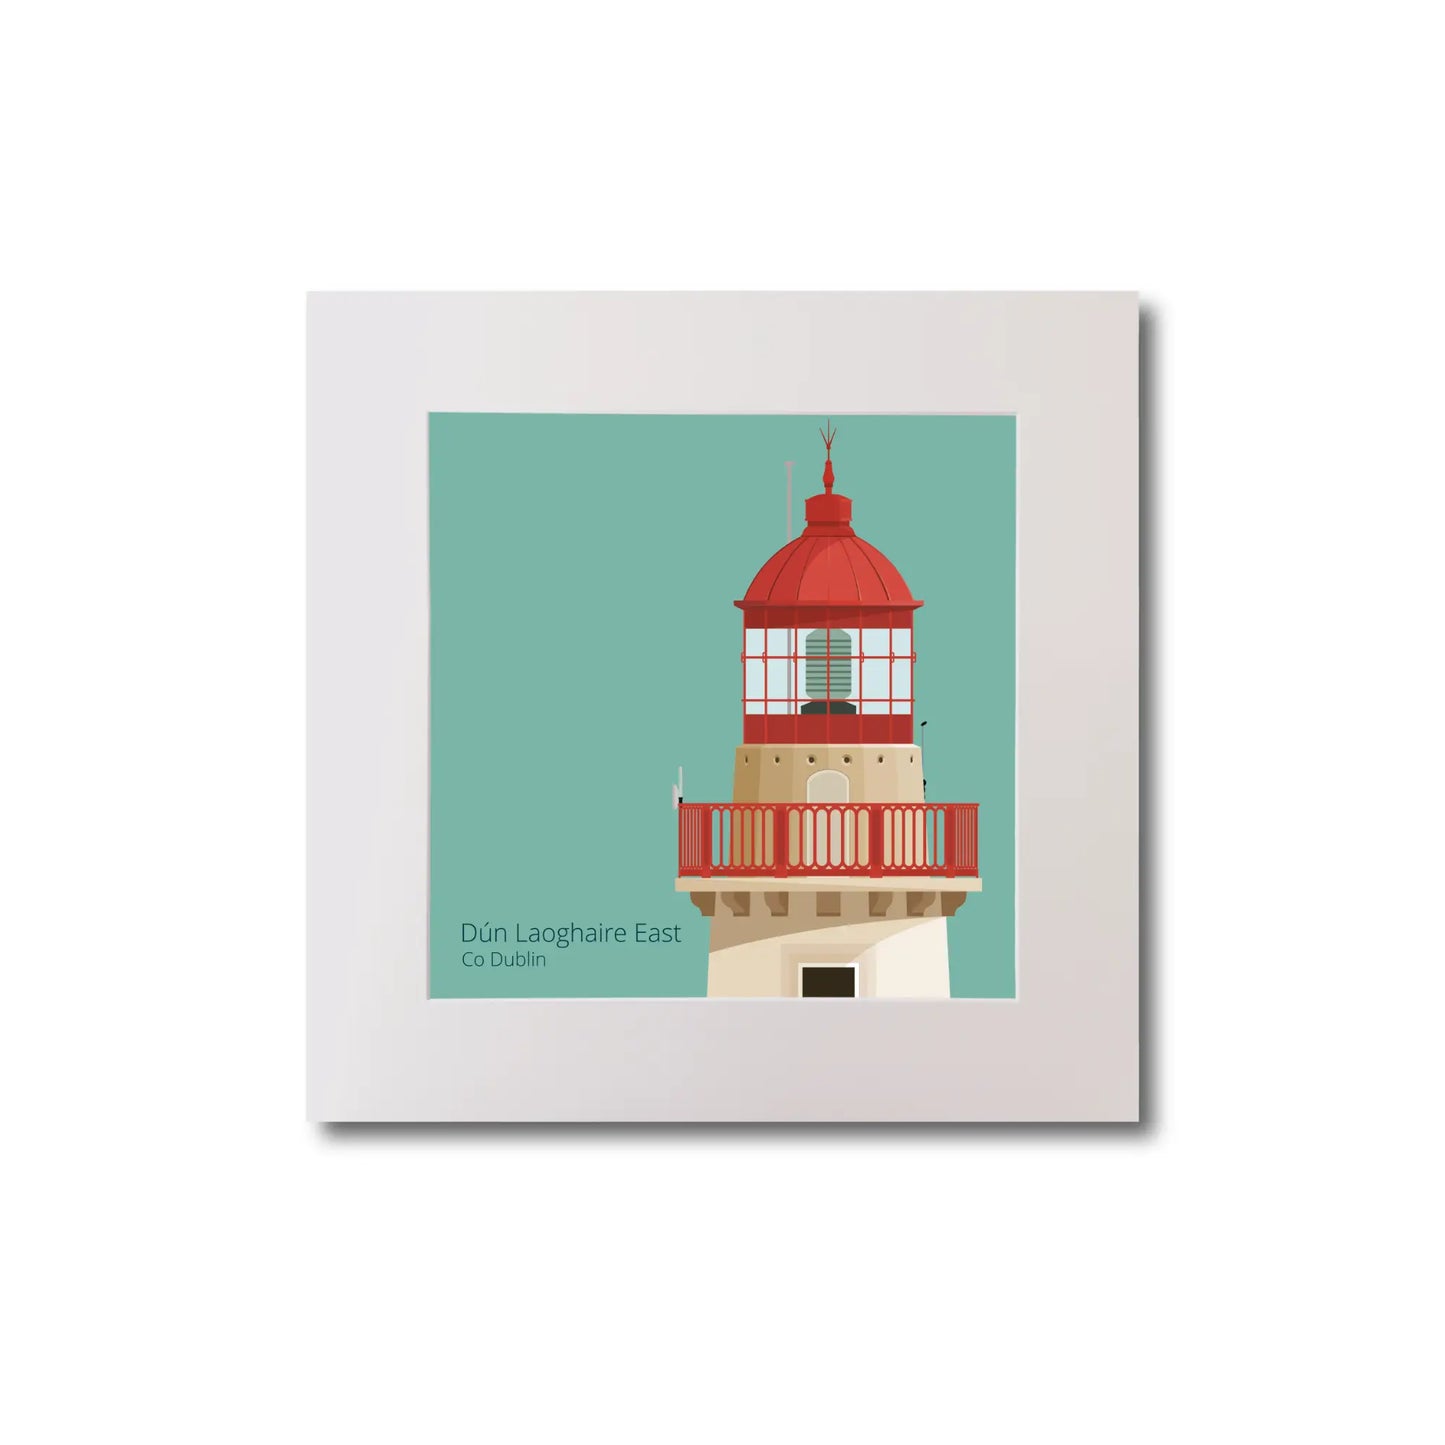 Illustration of Dún Laoghaire East lighthouse on an ocean green background, mounted and measuring 20x20cm.